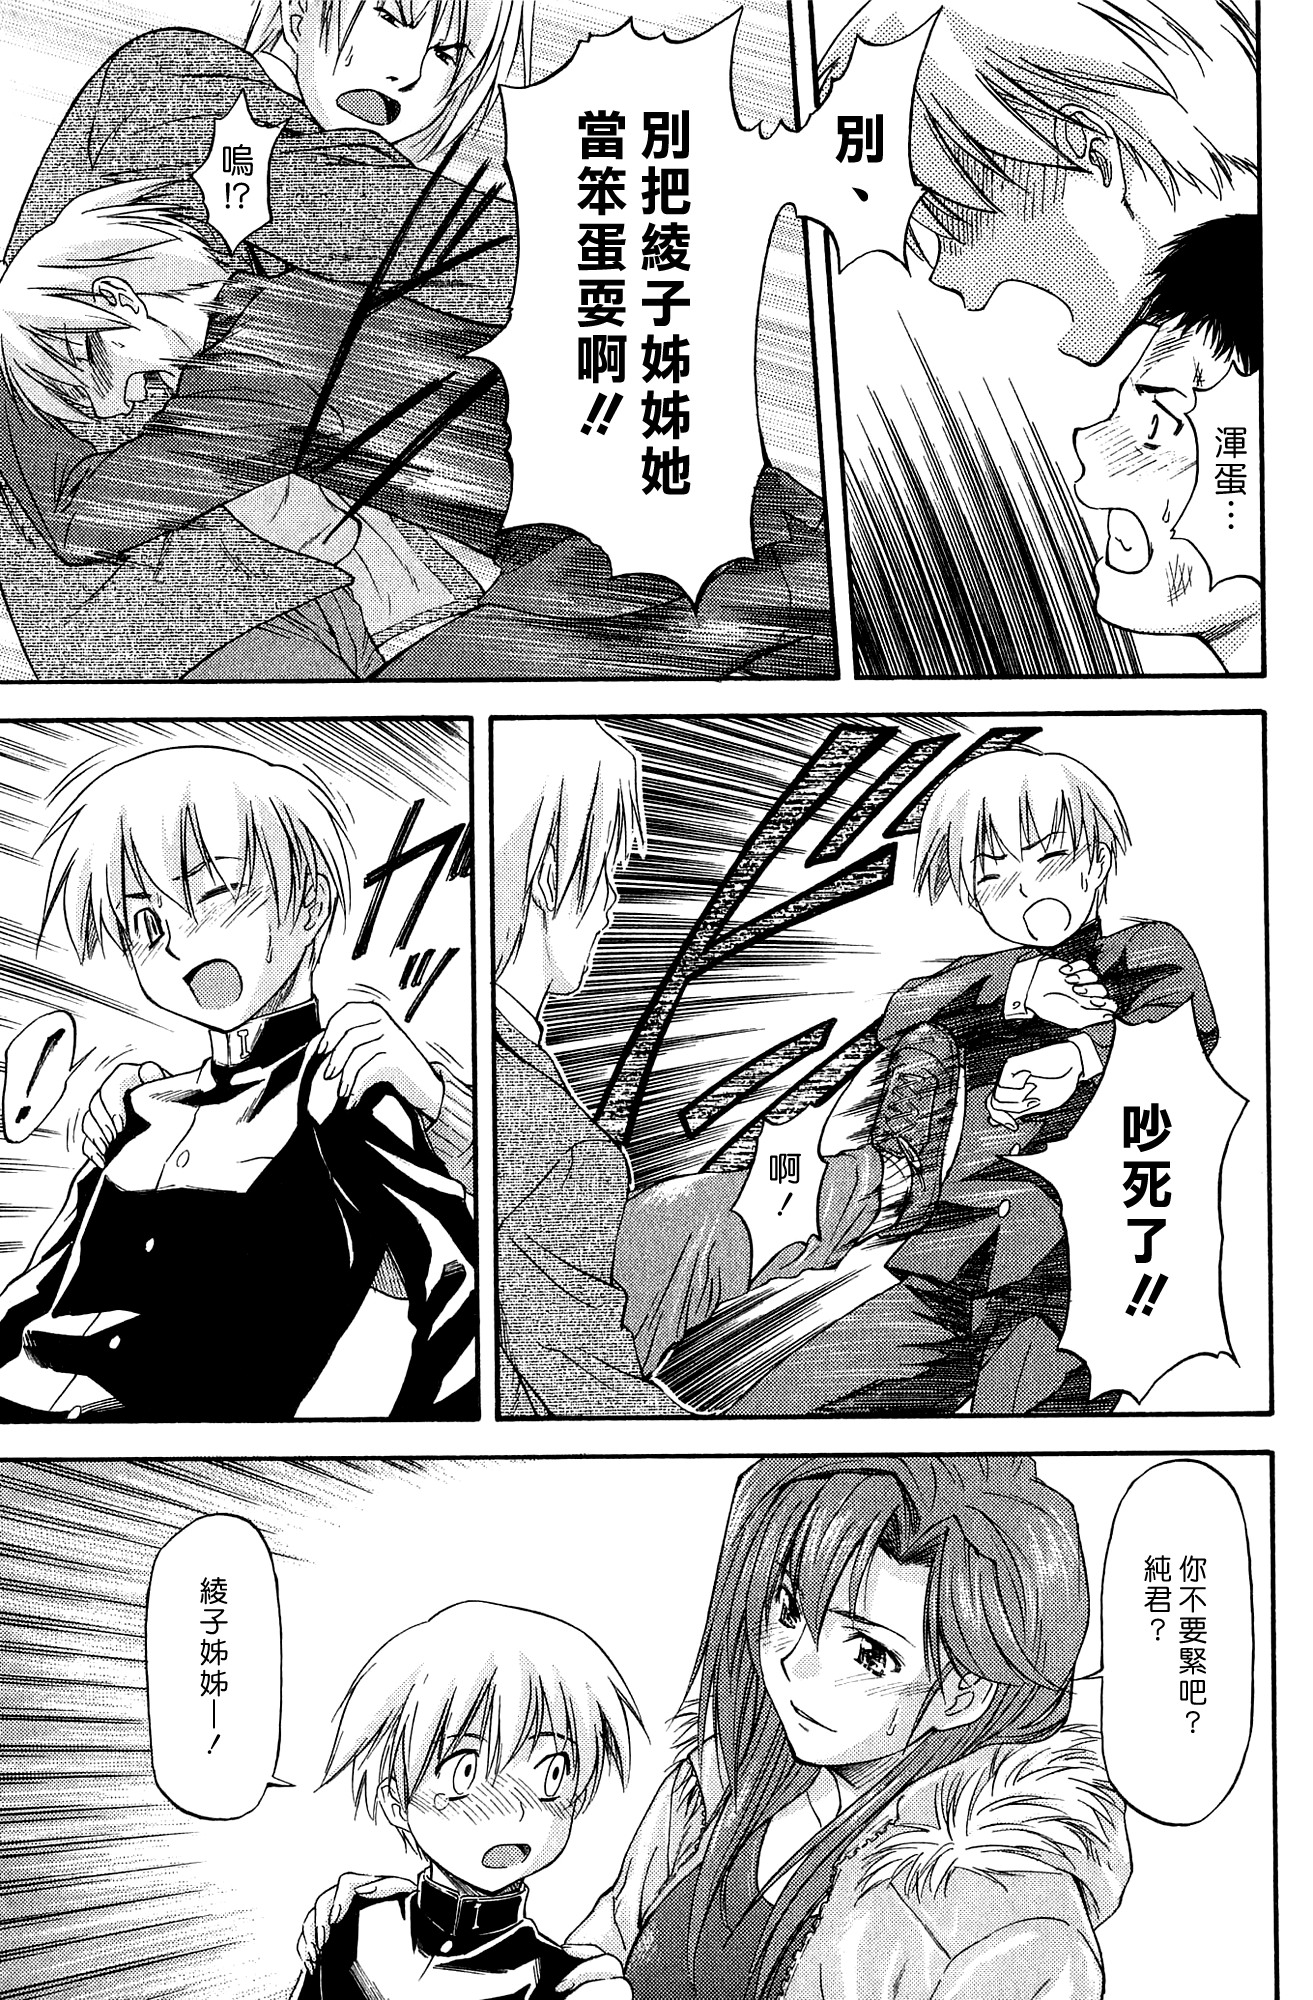 [Nagare Ippon] Ane+Otouto² (Turning Point) [Chinese] [漢化組漢化組] page 11 full